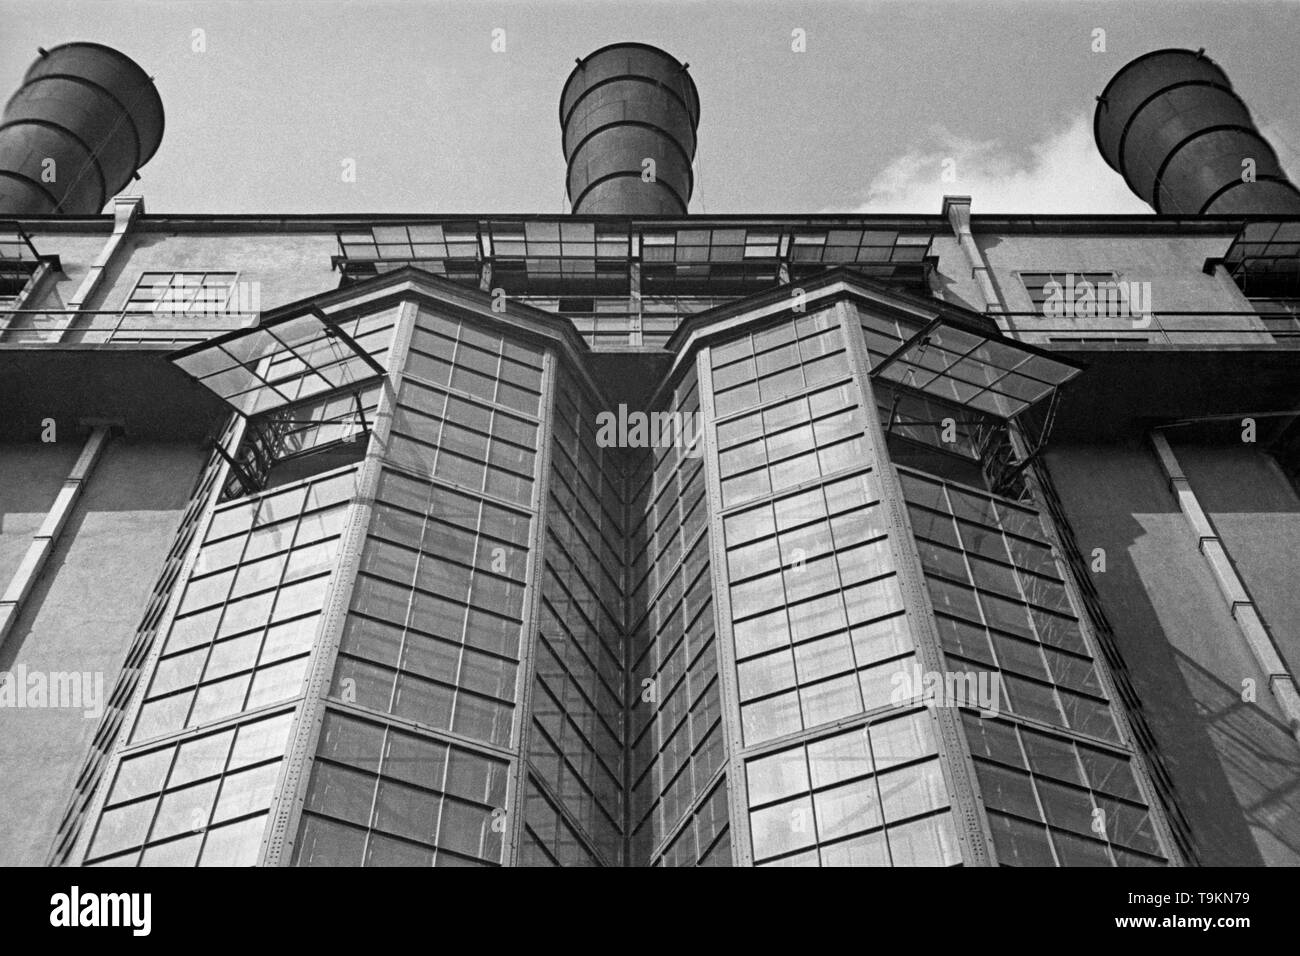 MoGES (Moscow Thermal Power Station). Museum: Moscow Photo Museum (House of Photography). Author: Alexander Mikhailovich Rodchenko. Stock Photo